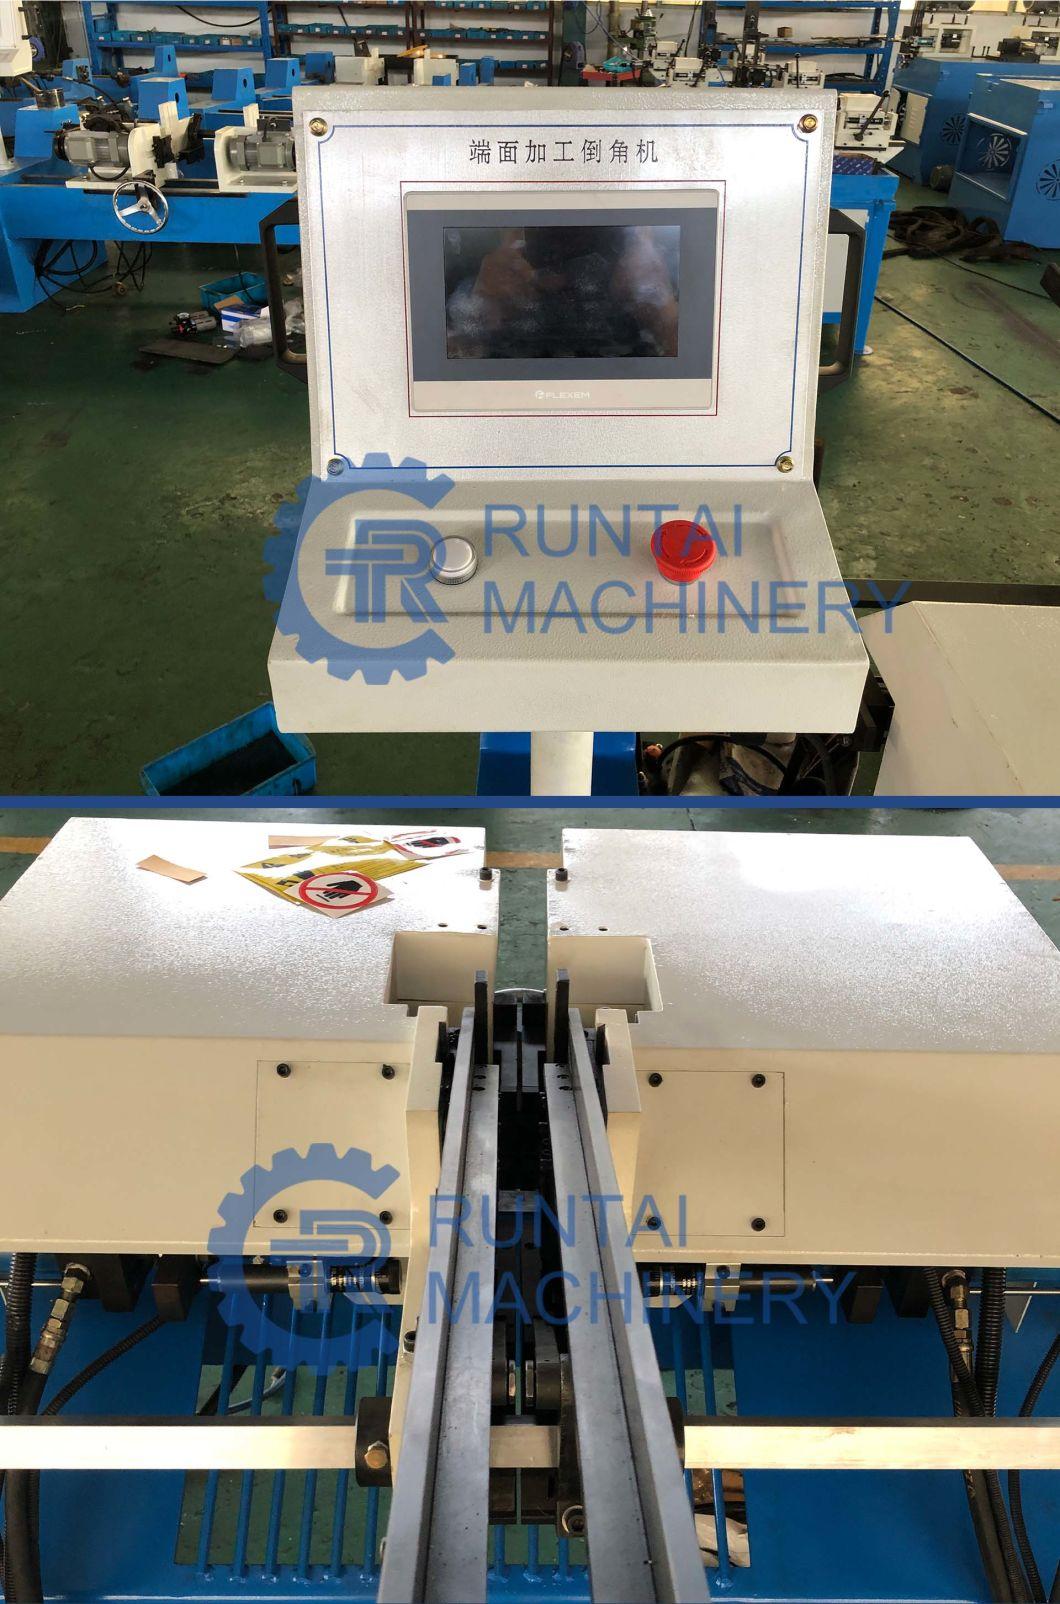 Manufacturers Customized Automatic Long Metal Tube Round Bar Chamfering Machine, Deburr Double - Ended Chamfering Machine